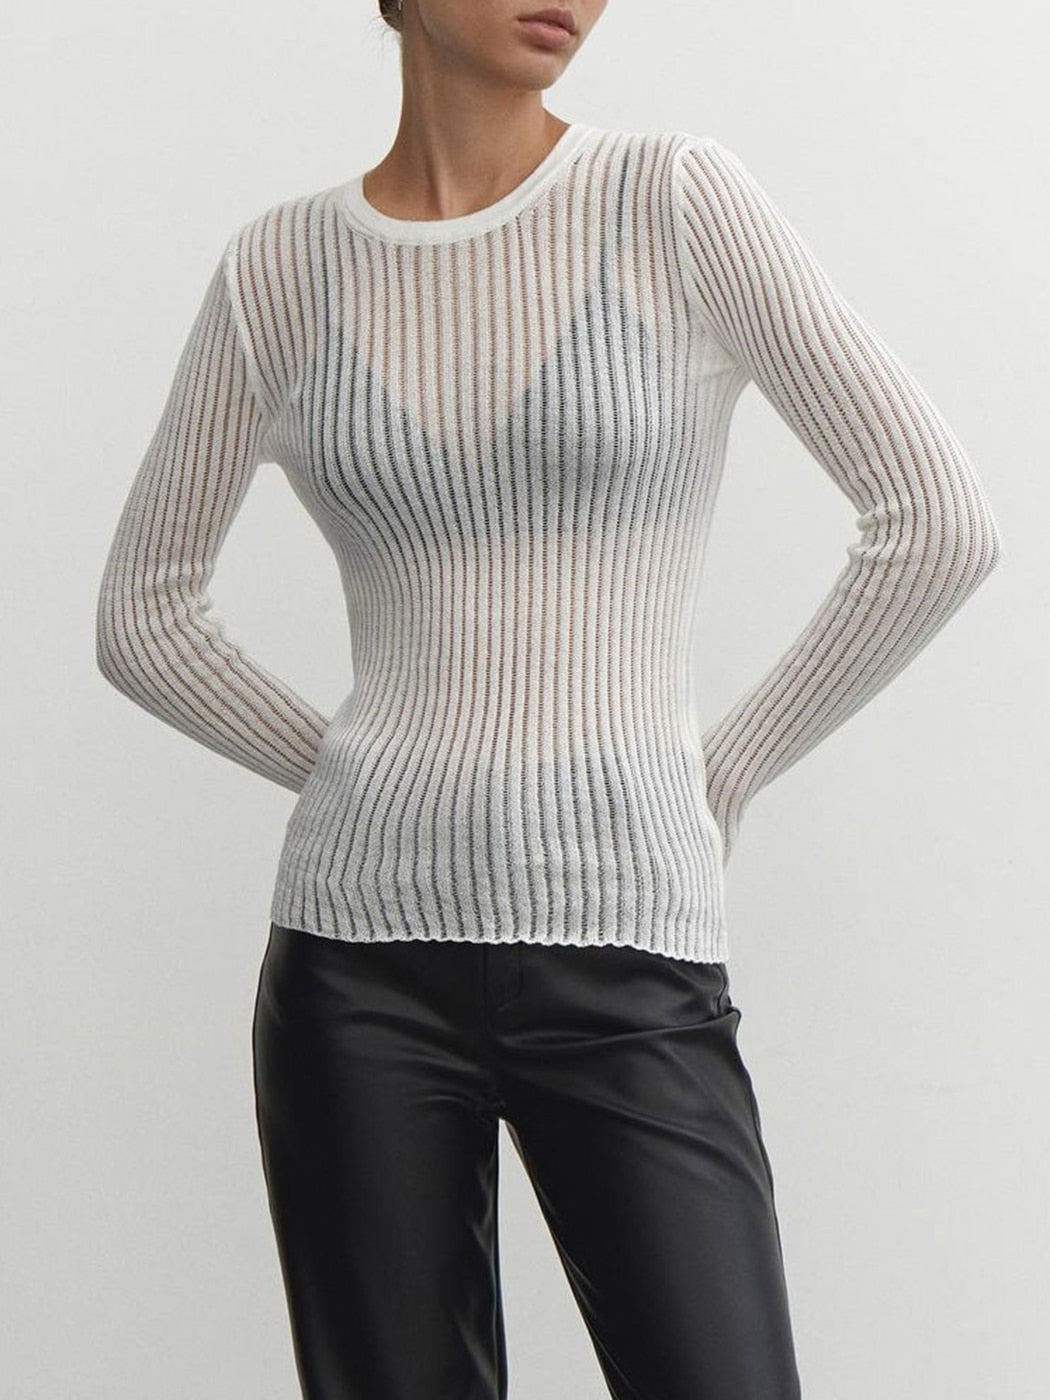 Thin Knit Sweater Women Solid Color Basic Long Sleeve Pullover